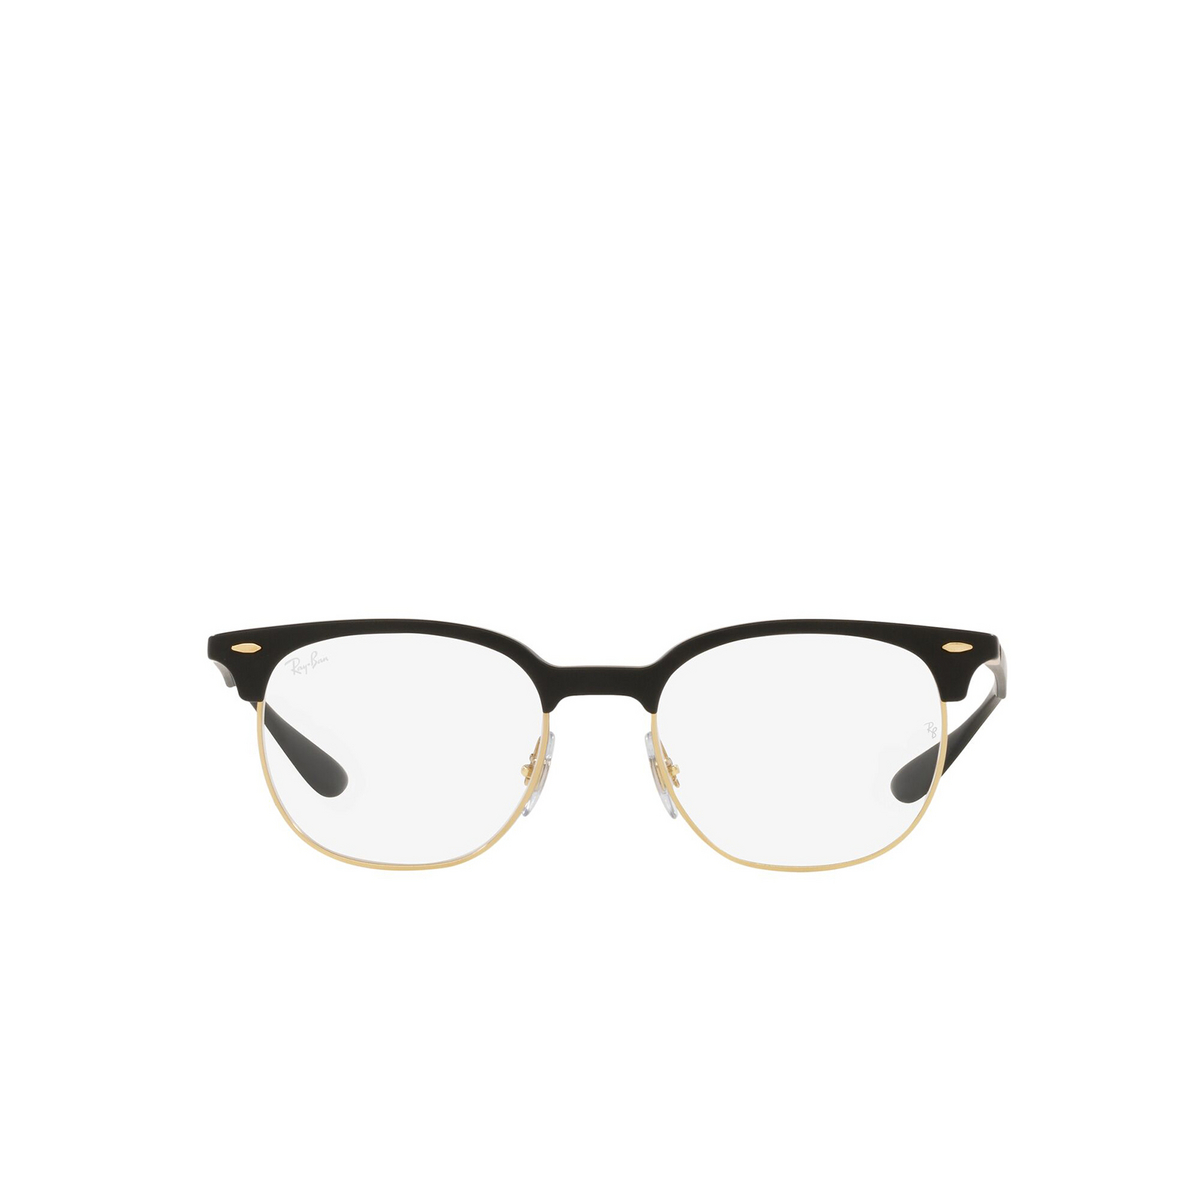 Ray-Ban RX7186 Eyeglasses 8151 Sand Black - front view